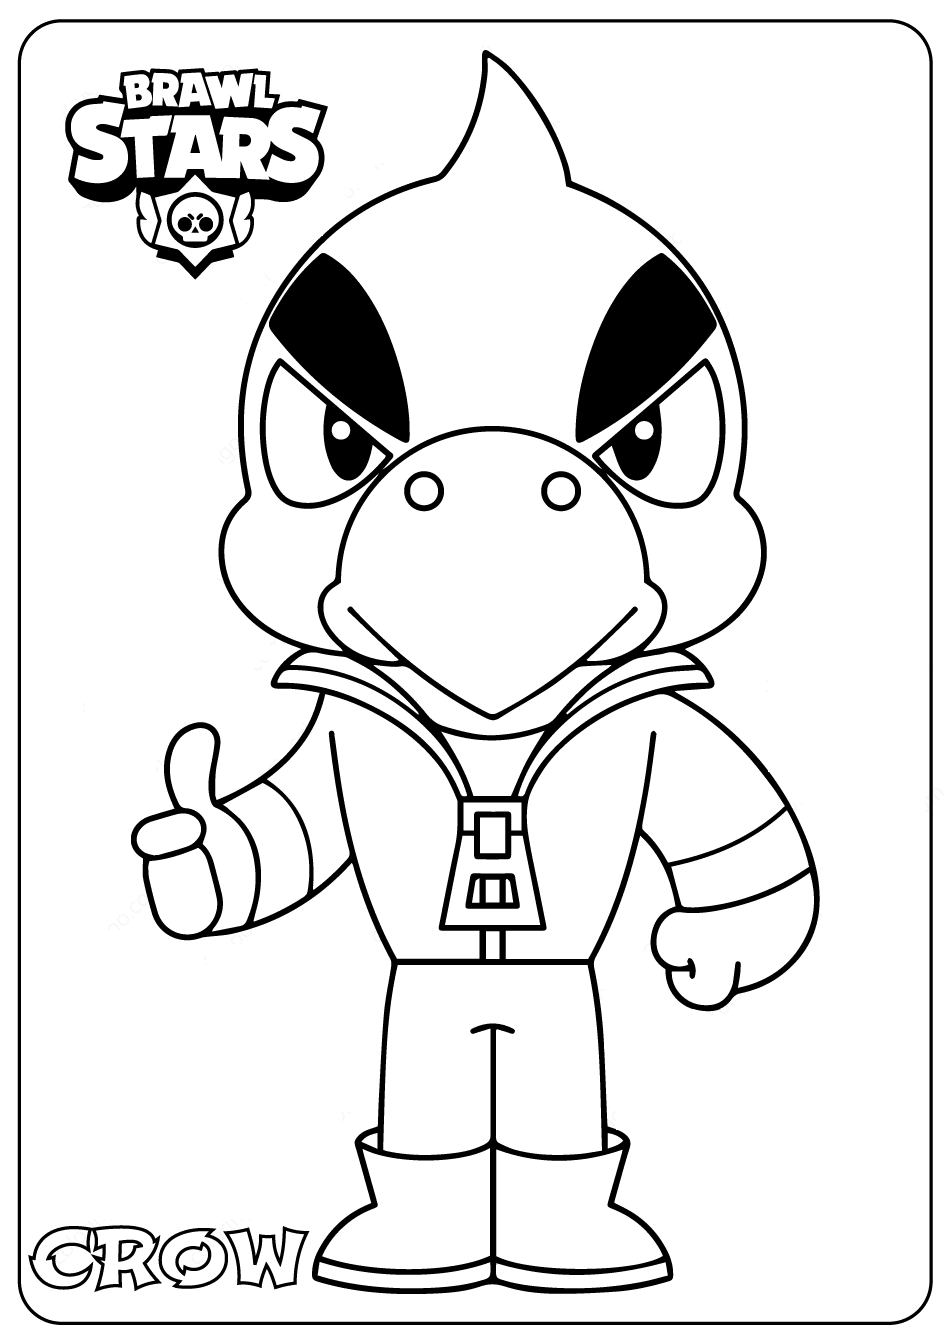 Crow From Brawl Stars Fires A Trio Of Poisoned Daggers Coloring Pages Brawl Stars Coloring Pages Coloring Pages For Kids And Adults - brawl stars fire crow black and white